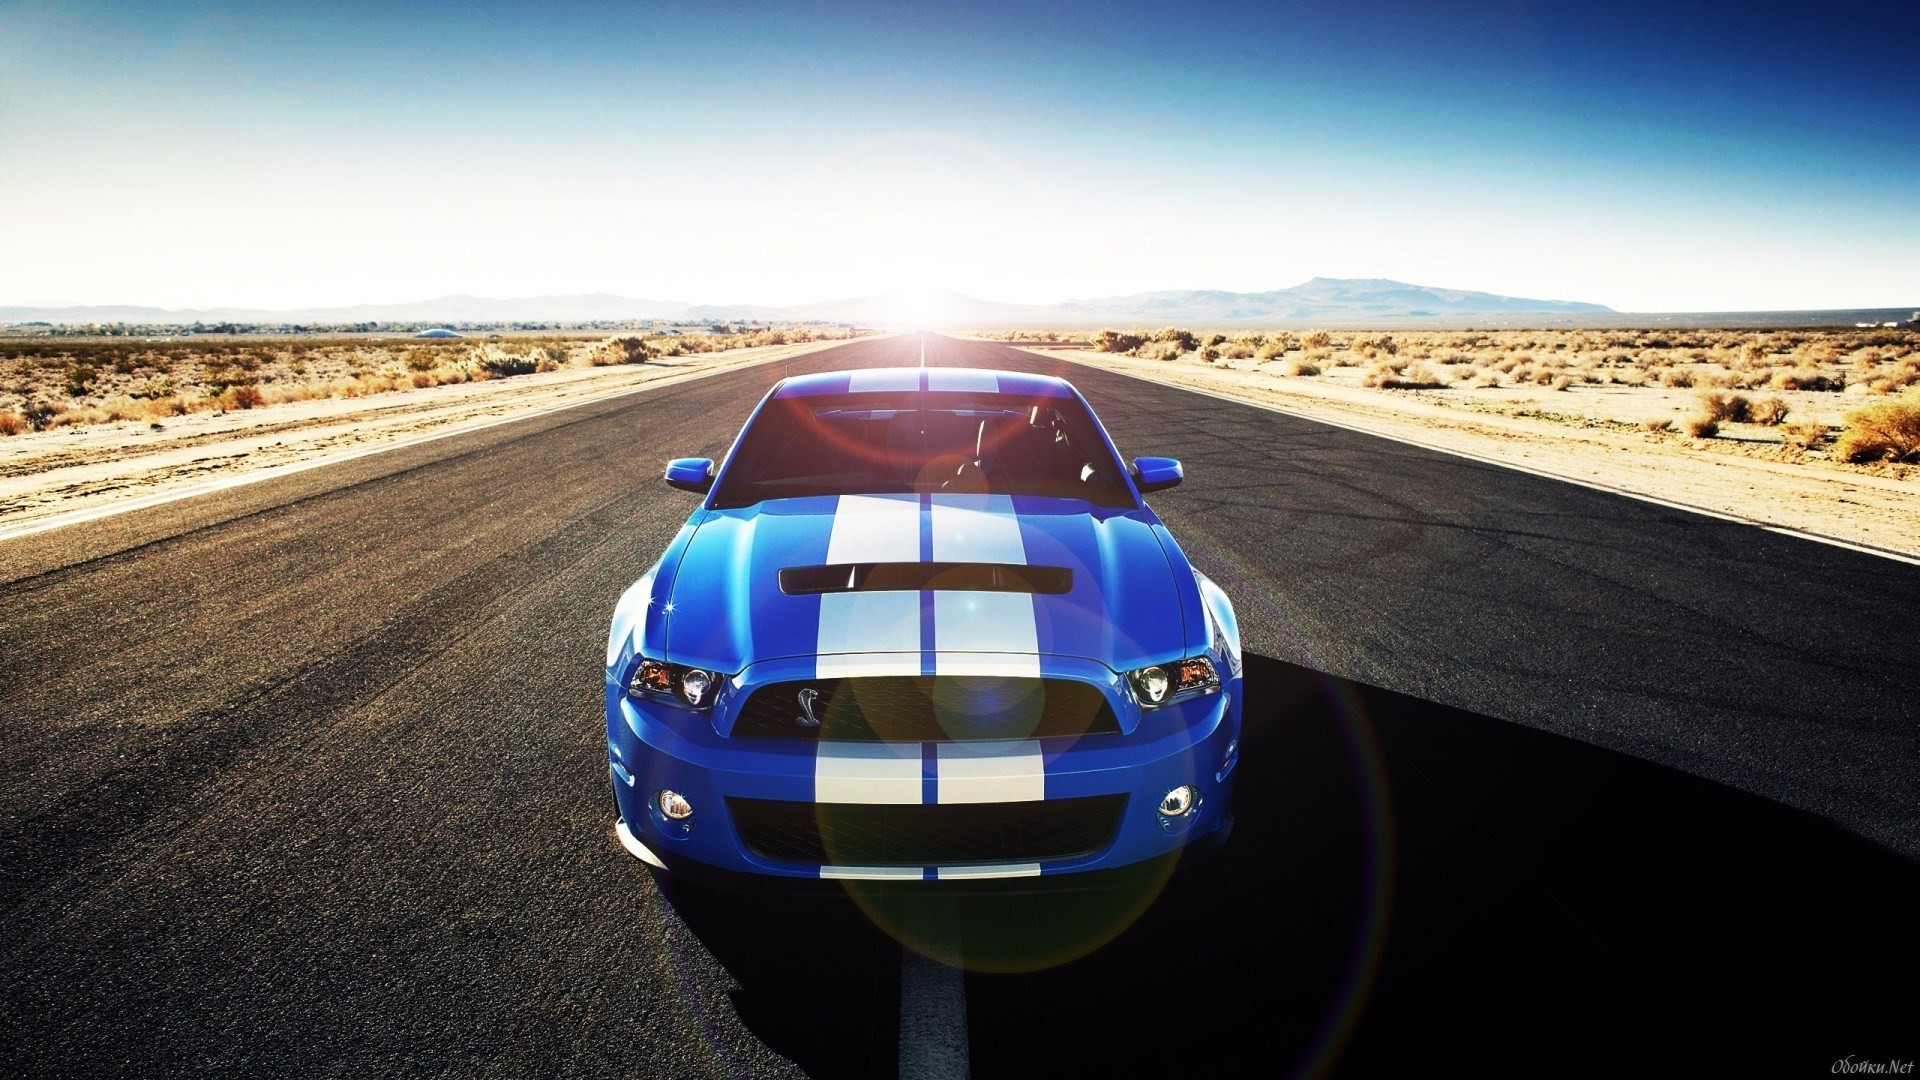 High Resolution Wallpapers Mustang Wallpaper, Bowie - Ford Mustang Shelby Gt 500 Wüste - HD Wallpaper 